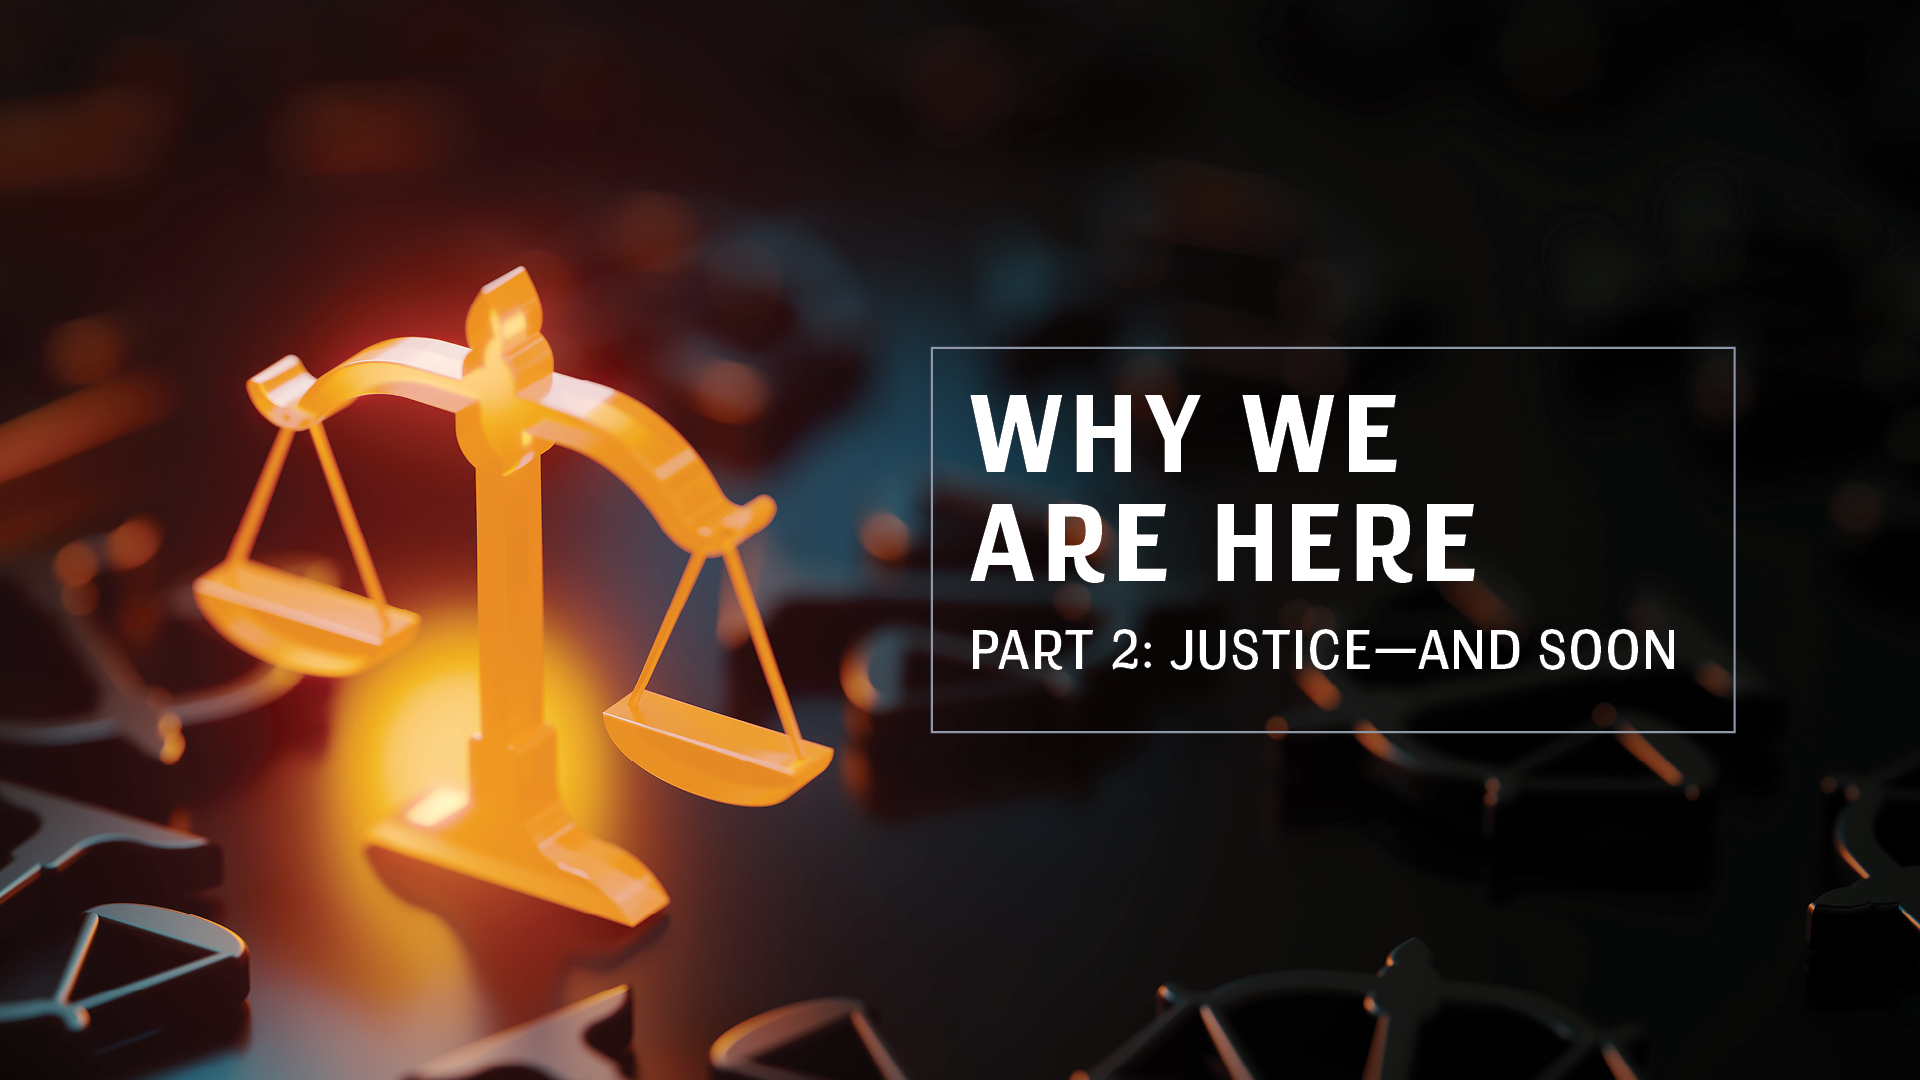 Part 2: Justice—and Soon